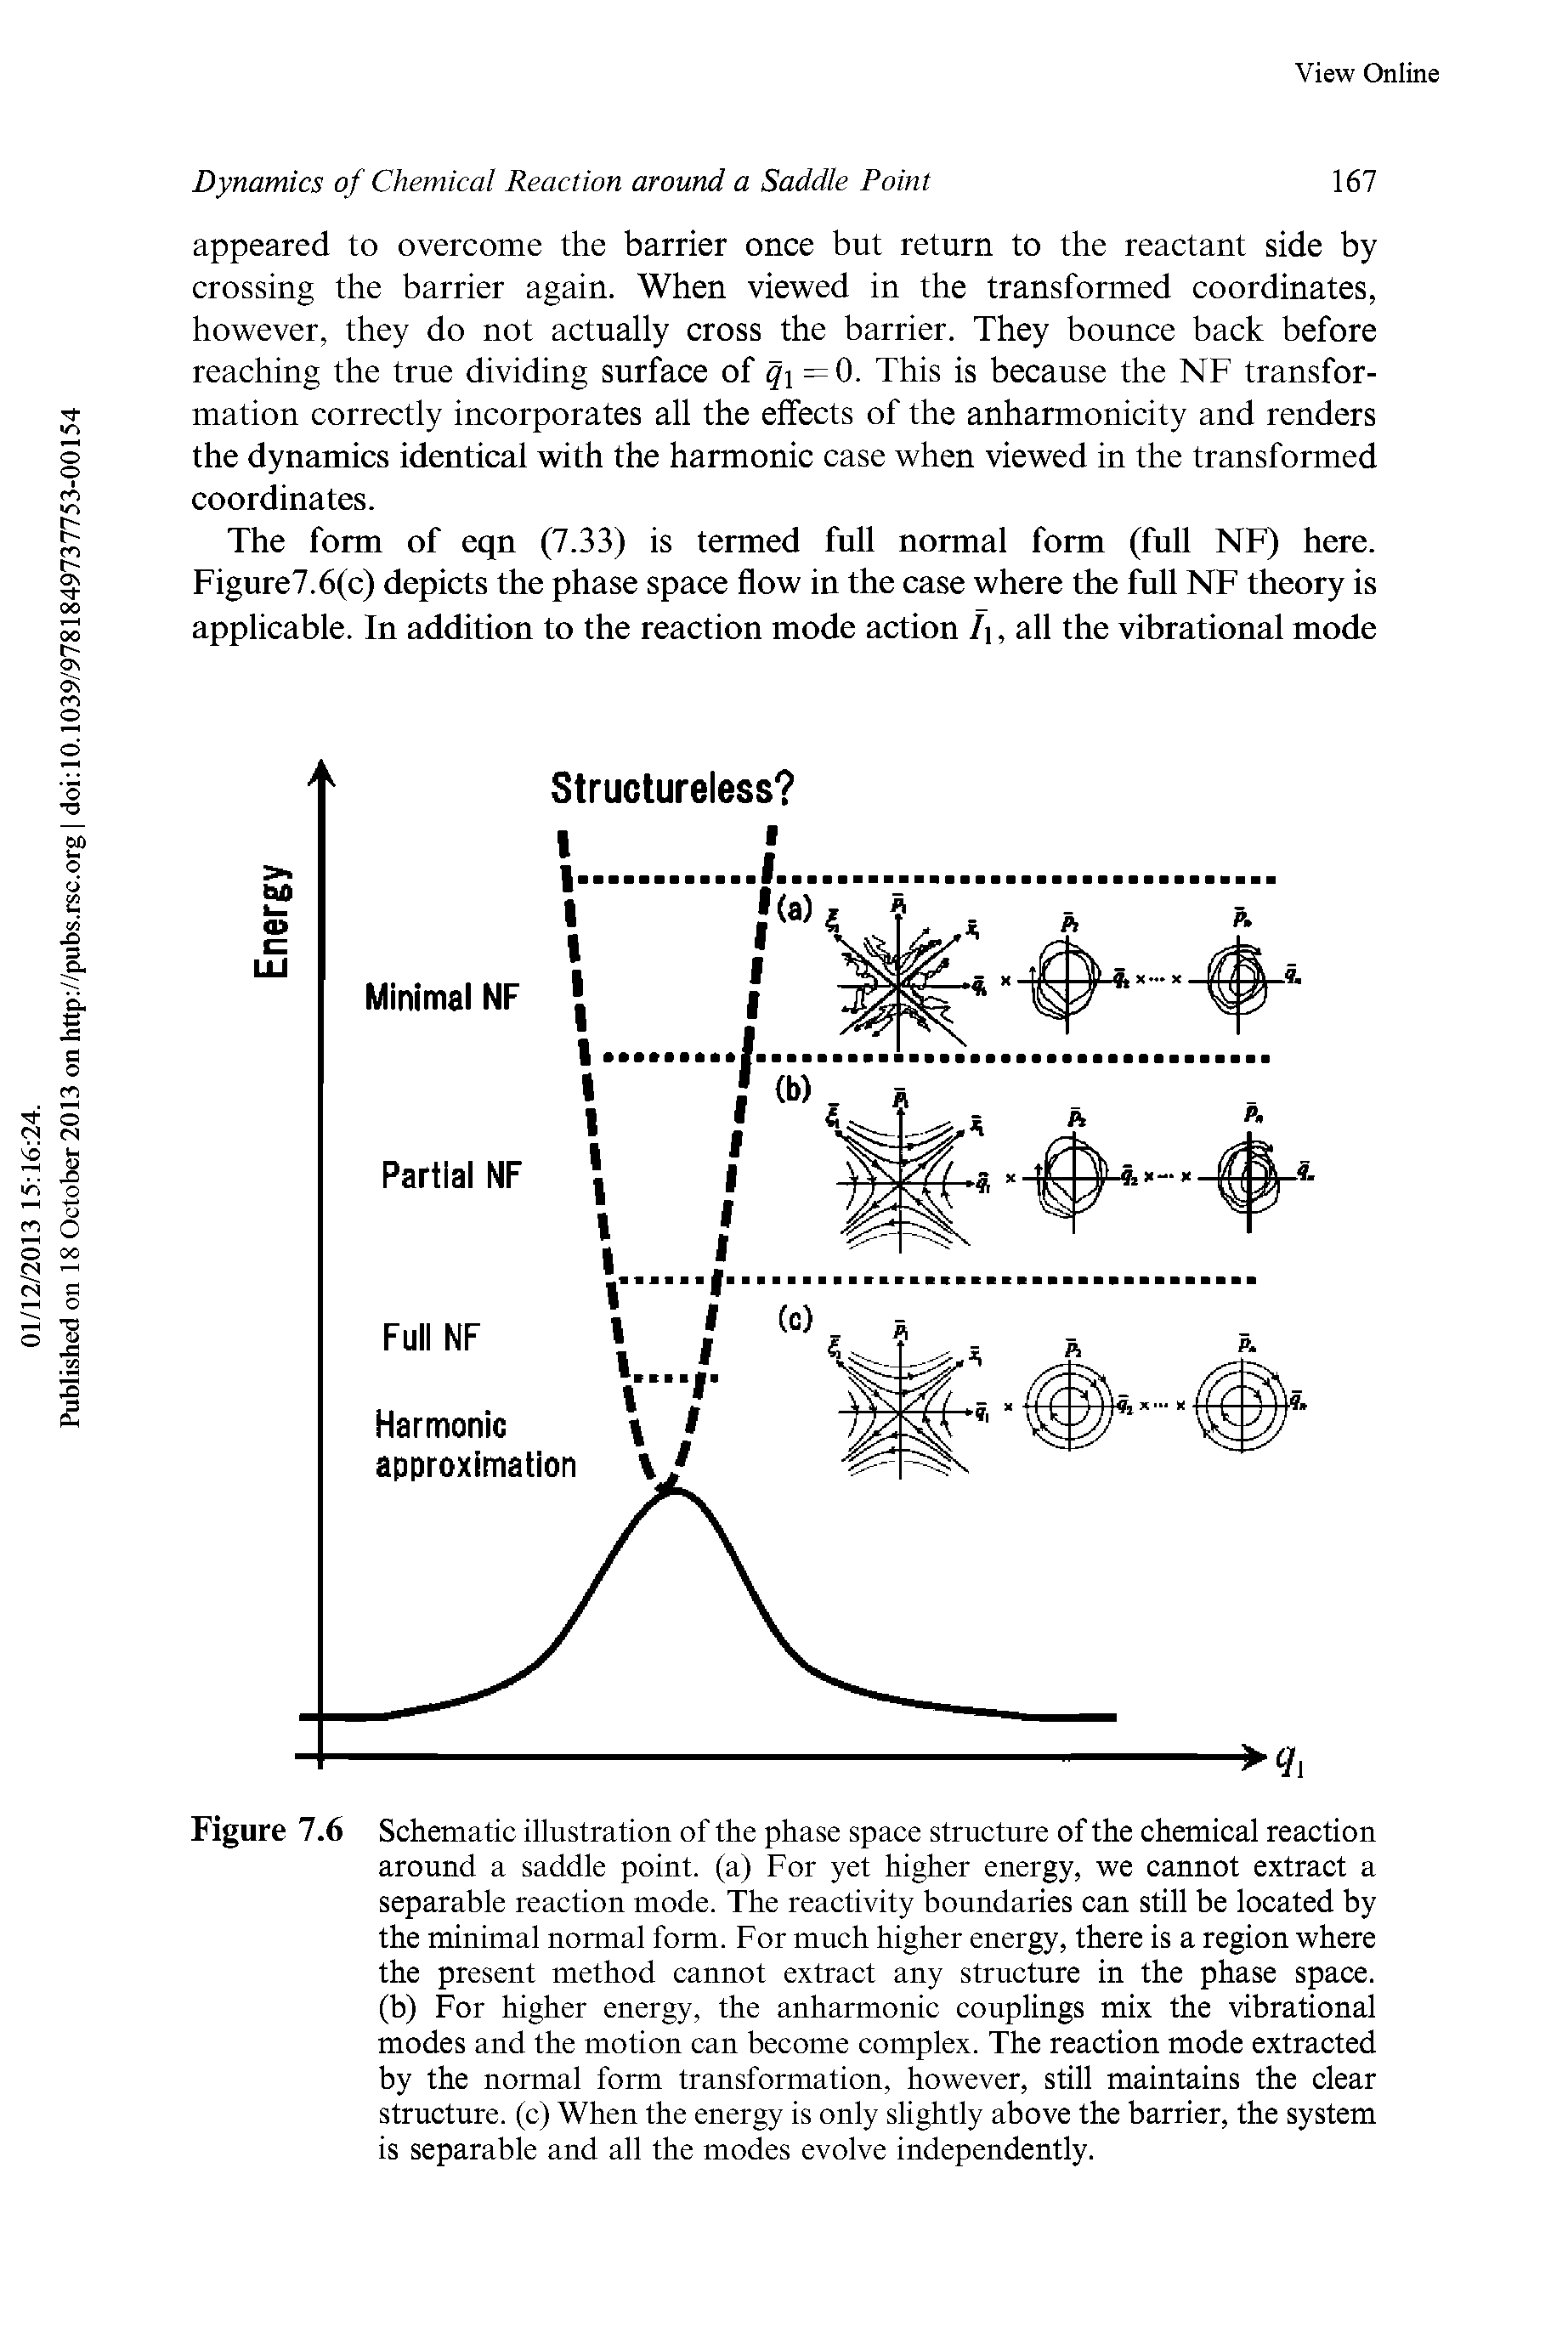 Figure 7.6 Schematic illustration of the phase space structure of the chemical reaction around a saddle point, (a) For yet higher energy, we cannot extract a separable reaction mode. The reactivity boundaries can still be located by the minimal normal form. For much higher energy, there is a region where the present method cannot extract any structure in the phase space, (b) For higher energy, the anharmonic couplings mix the vibrational modes and the motion can become complex. The reaction mode extracted by the normal form transformation, however, still maintains the clear structure, (c) When the energy is only slightly above the barrier, the system is separable and all the modes evolve independently.